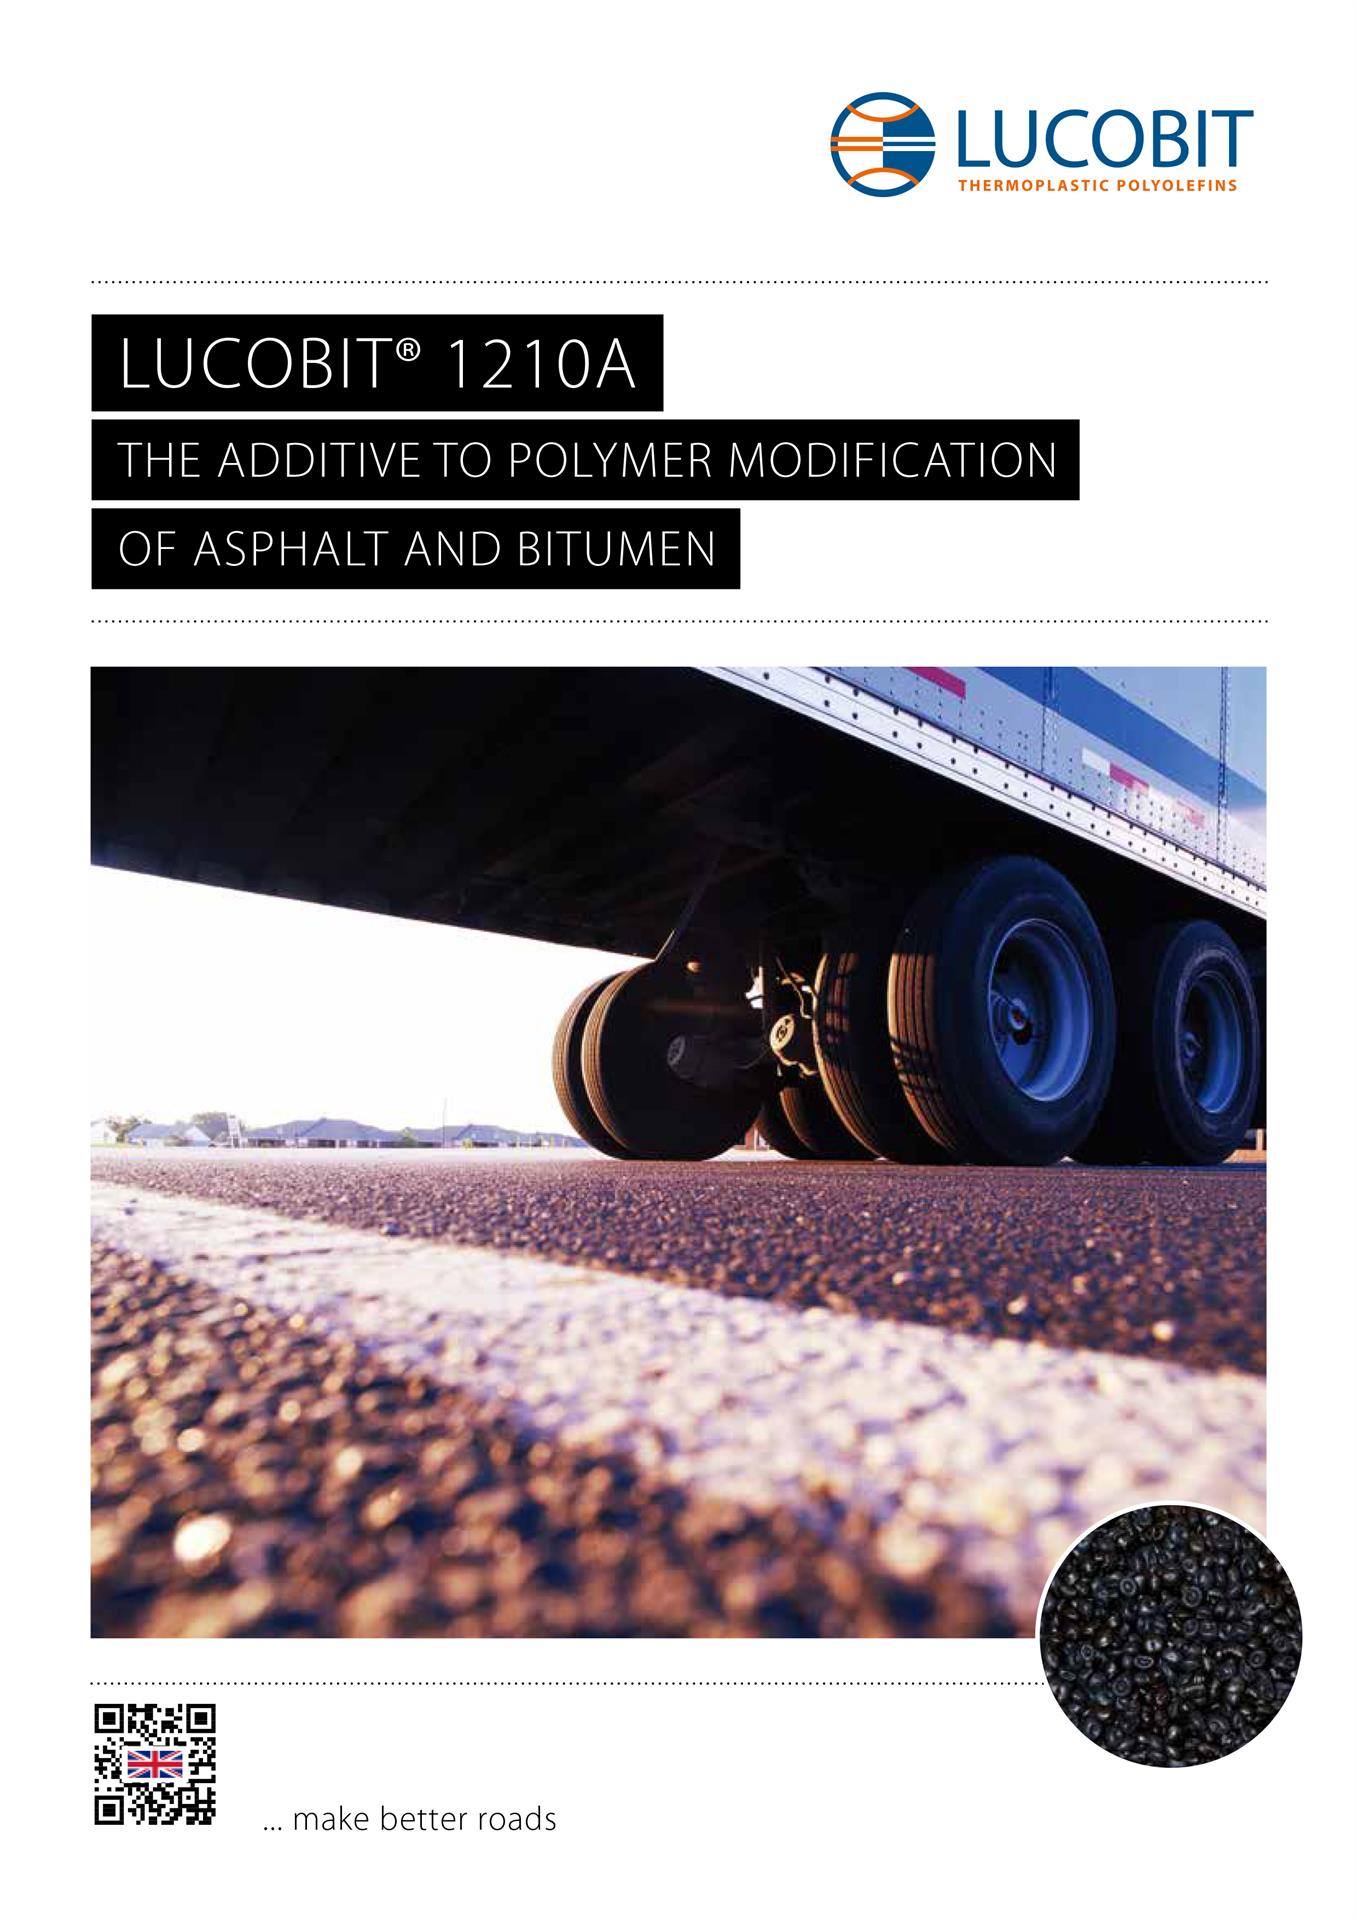 LUCOBIT 1210A Brochure - THE ADDITIVE TO POLYMER MODIFICATION OF ASPHALT AND BITUMEN